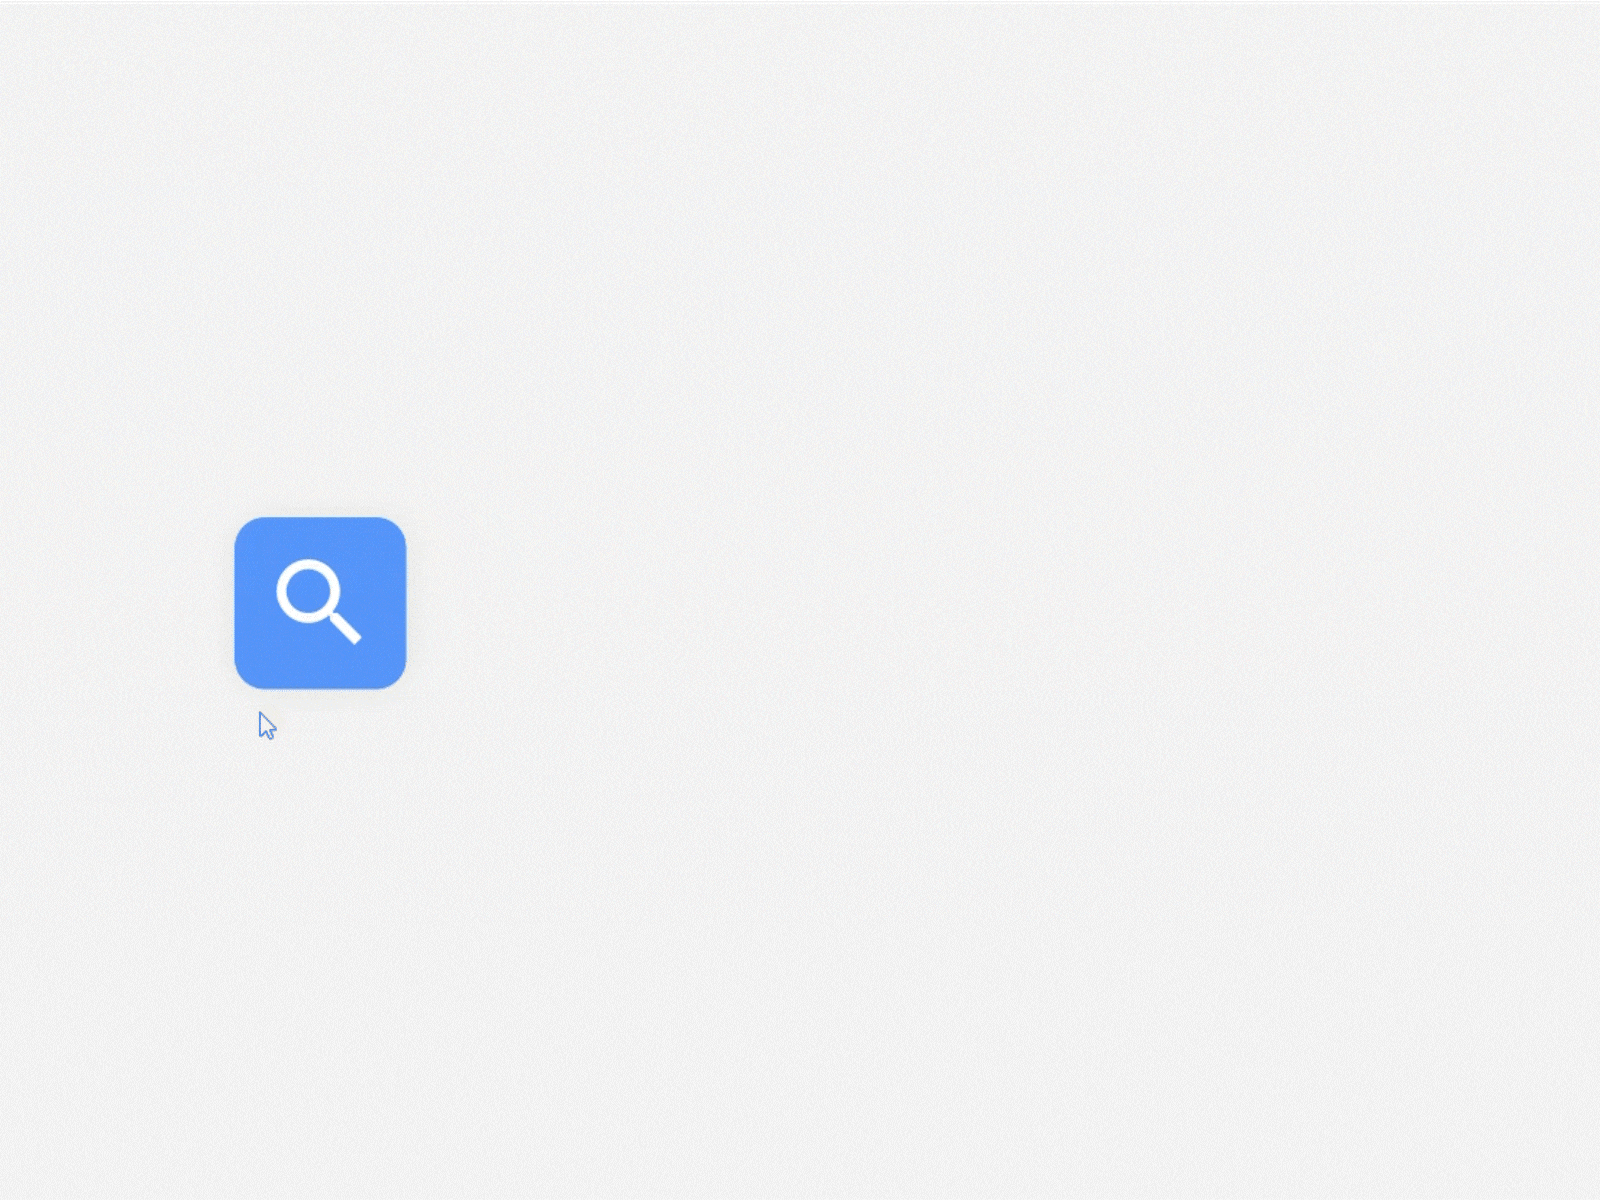 Daily UI 022 - Search